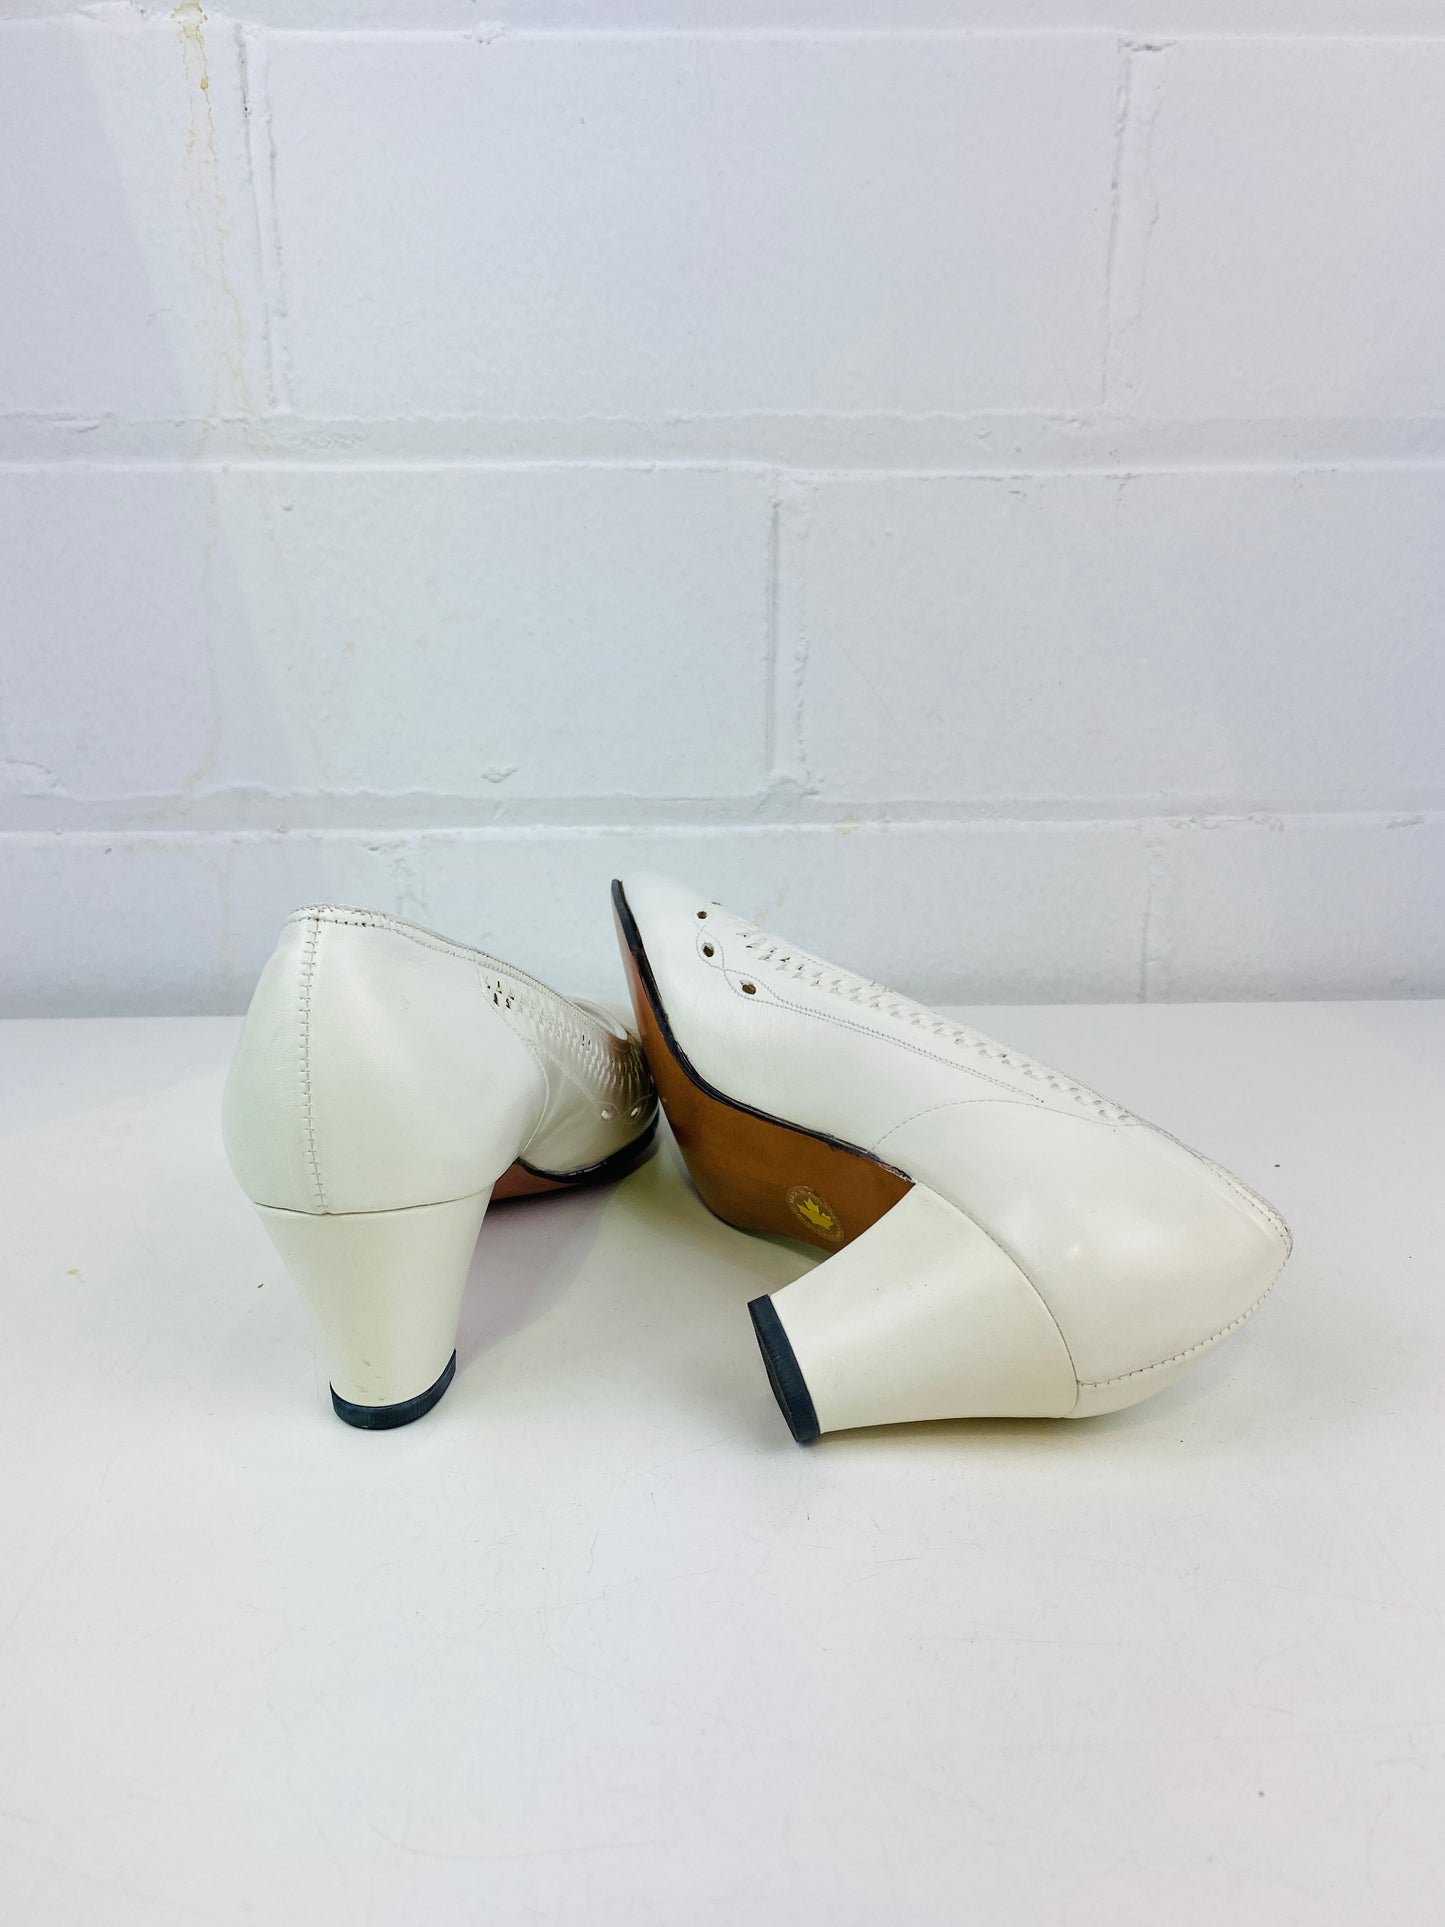 Vintage Deadstock Shoes, Women's 1980s White Leather Mid-Heel Pumps, NOS, 8230